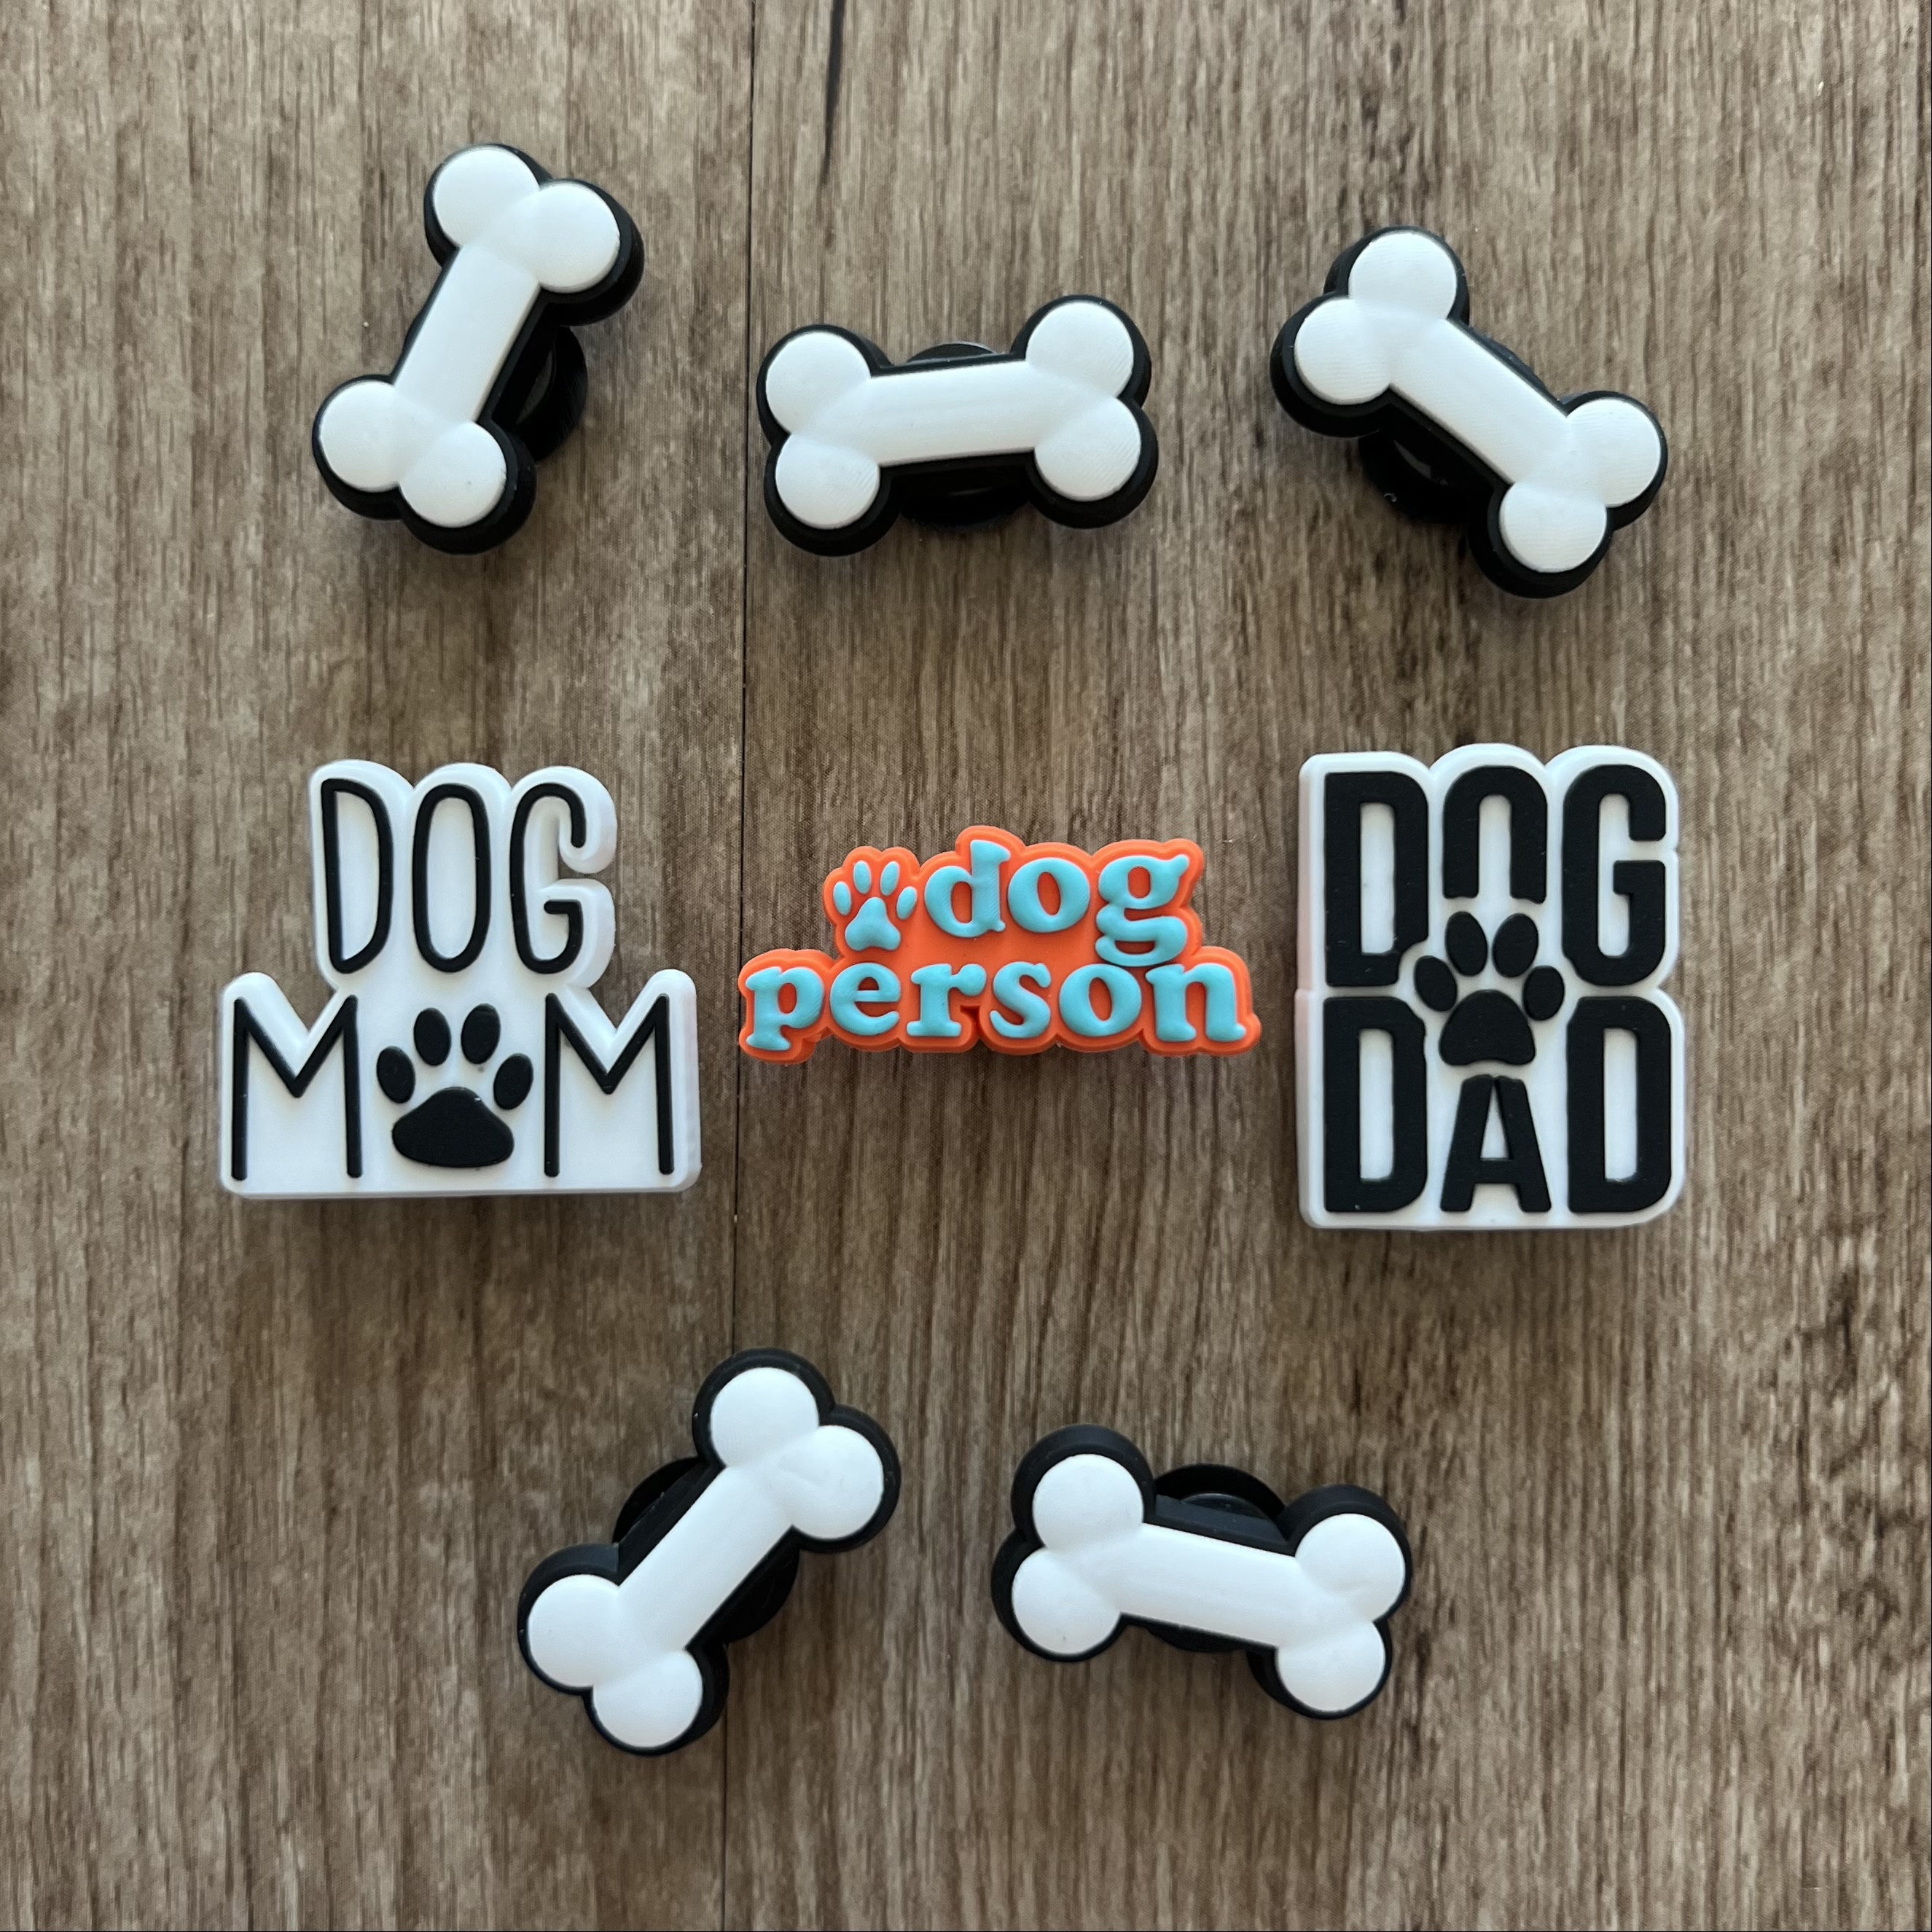 Dog Mom and Dog Dad Shoe Charms for Your Crocs, Dog Lover Trending